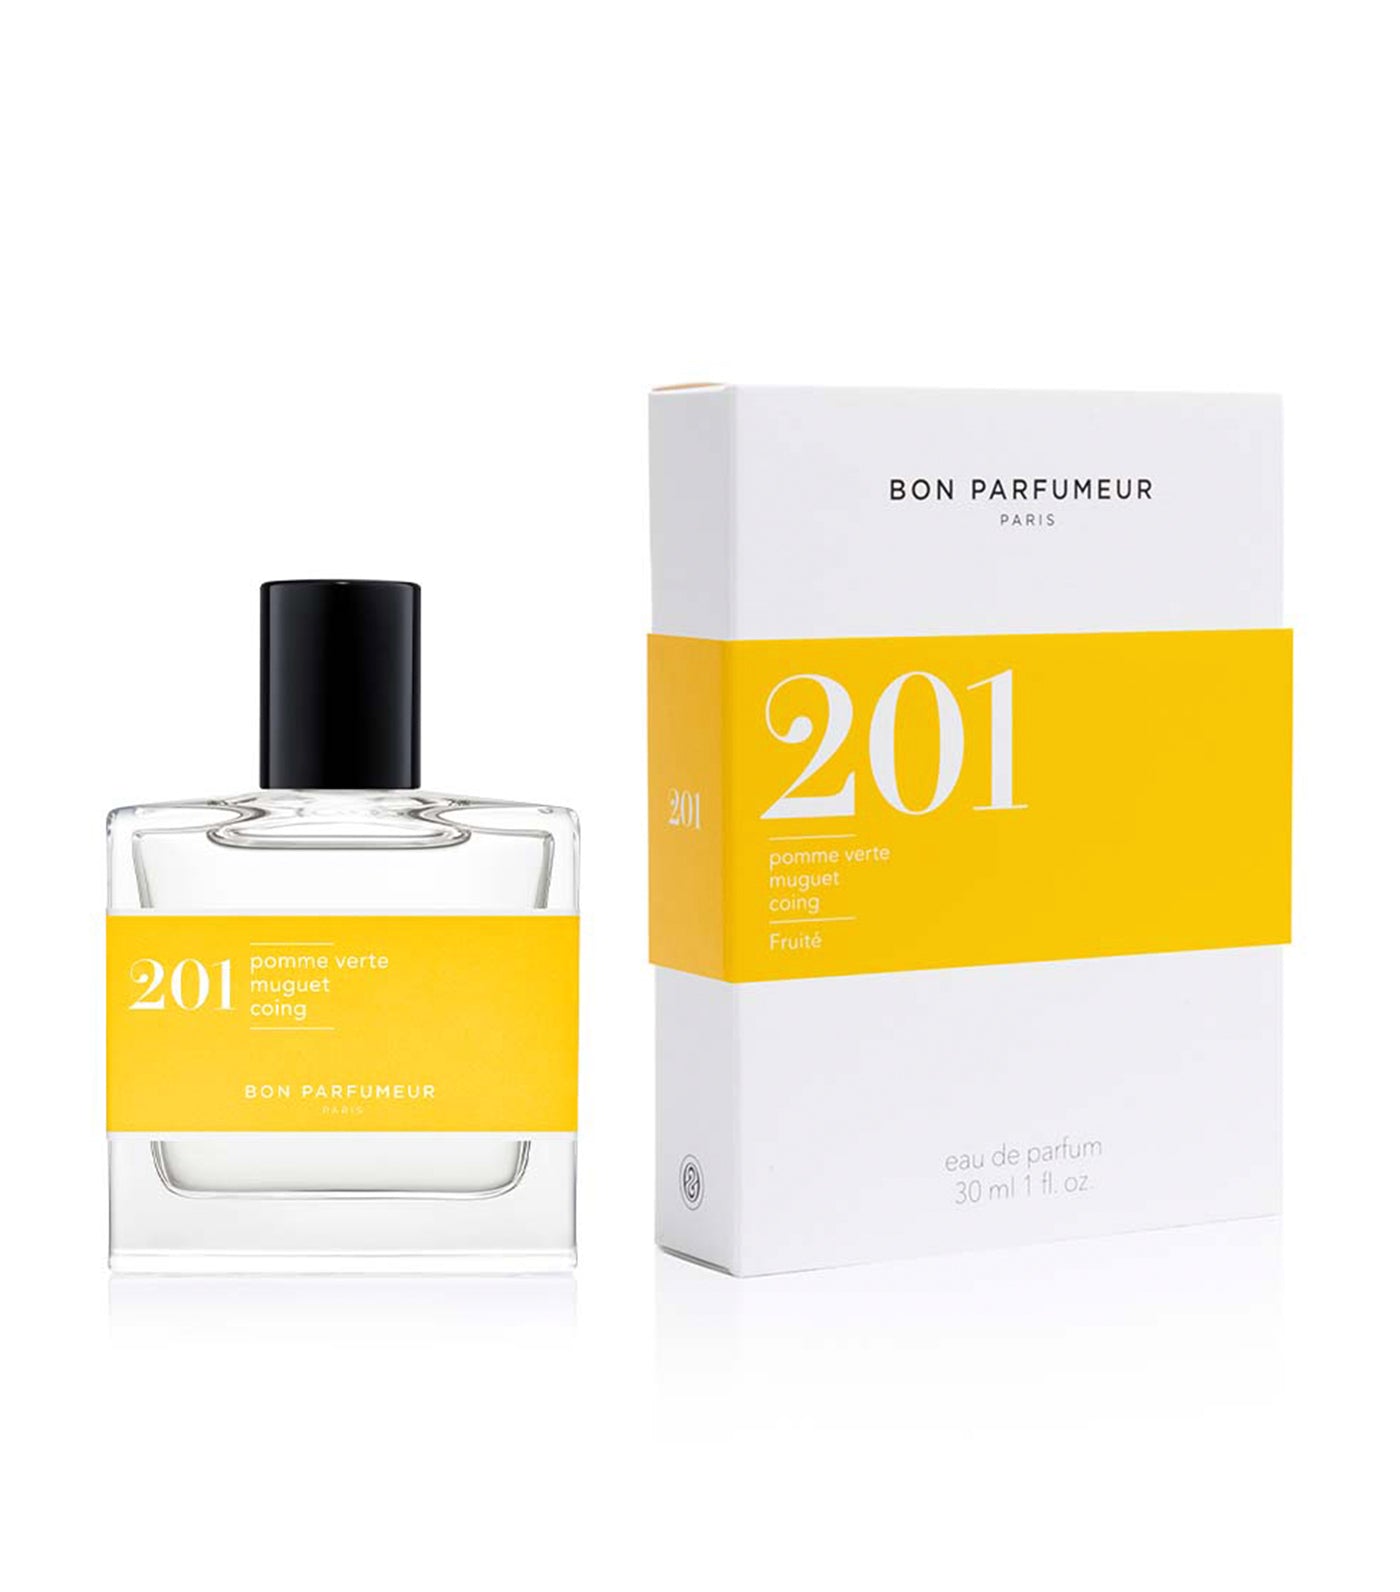 Eau de parfum 201 : green apple, lily-of-the-valley and quince